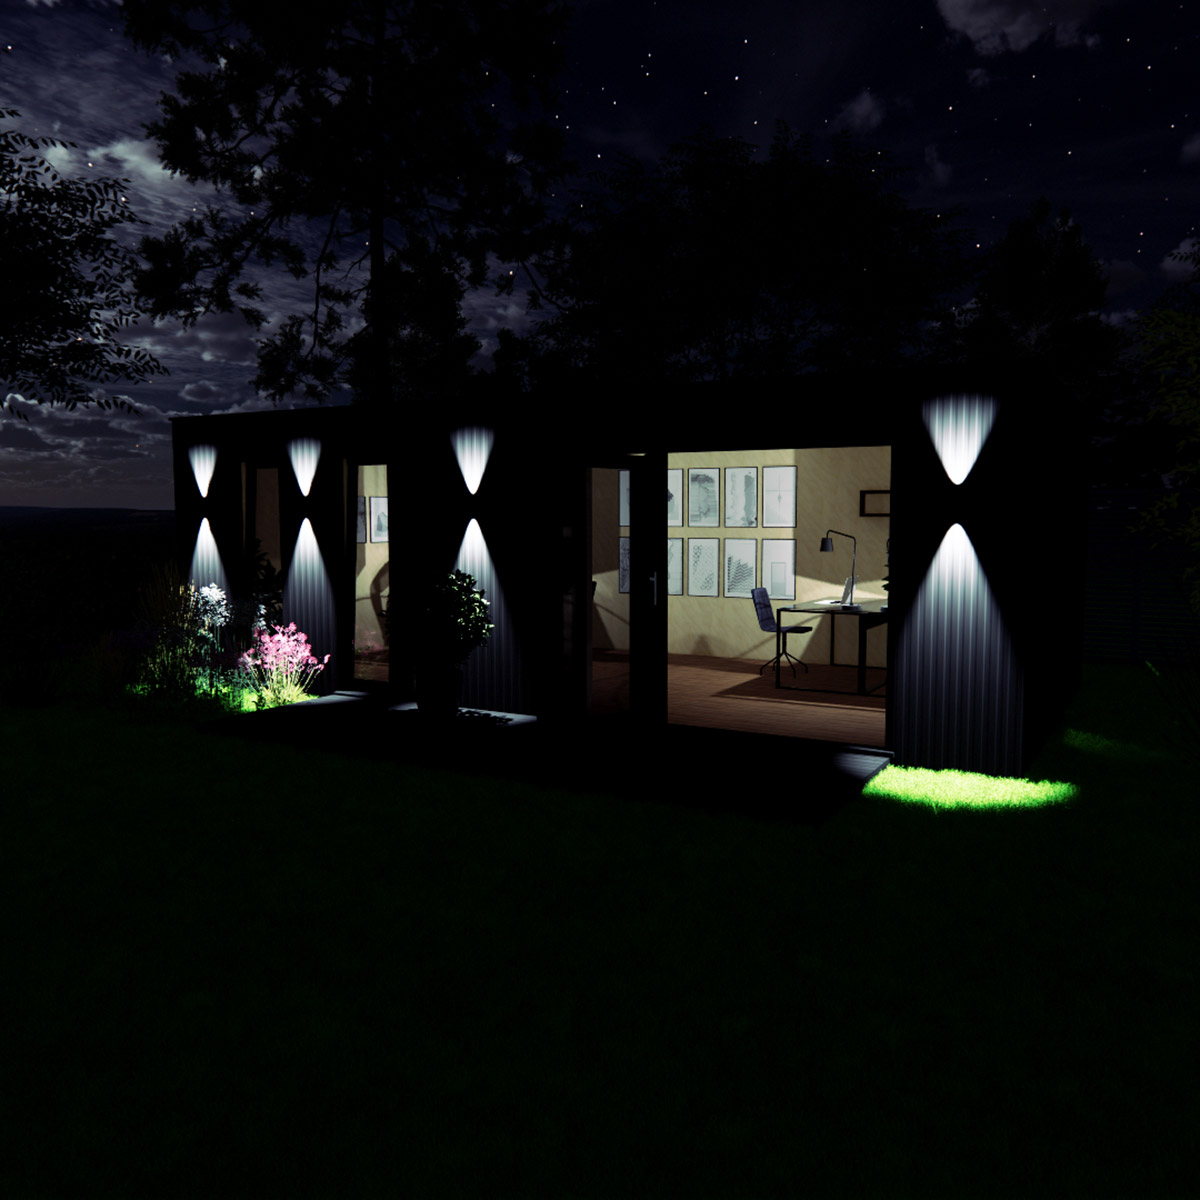 Night time visualisation of 3.6 by 7.4 garden room